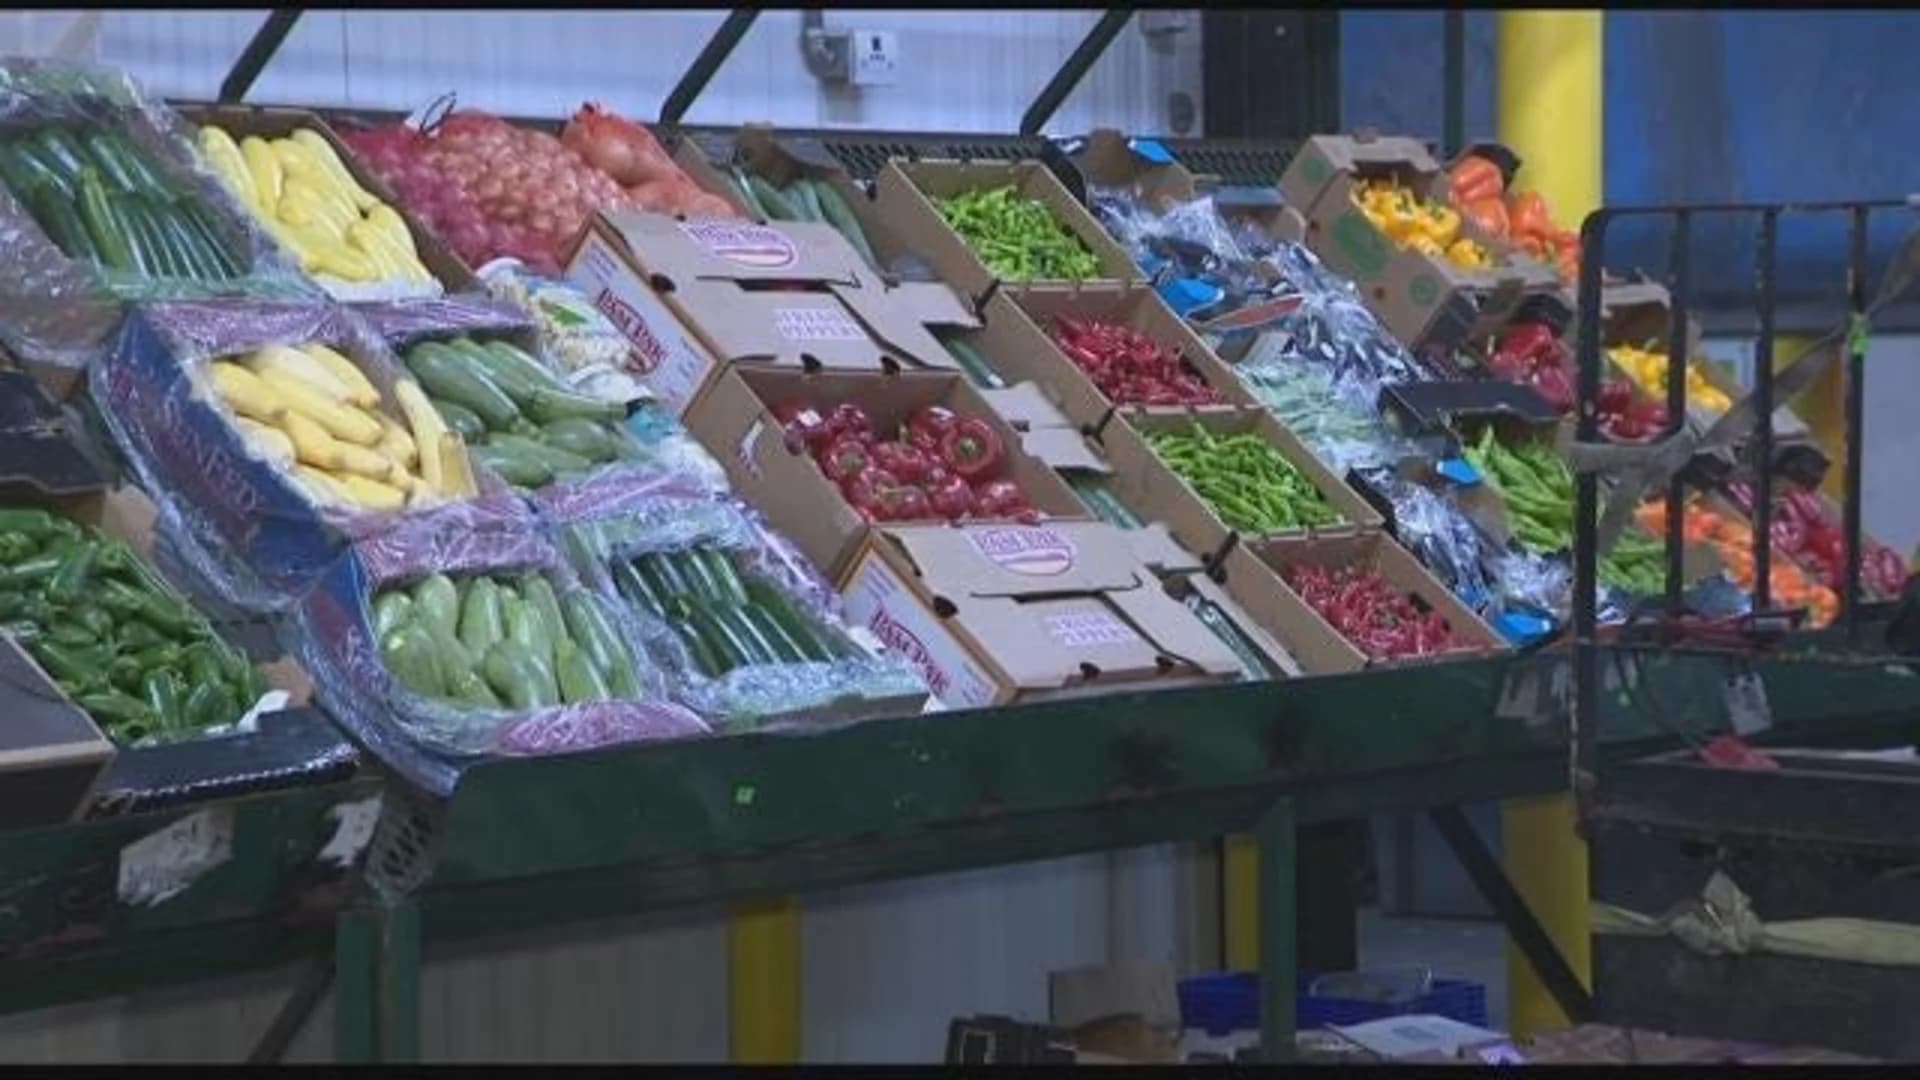 Busiest day of the year arrives for Hunts Point Produce Market